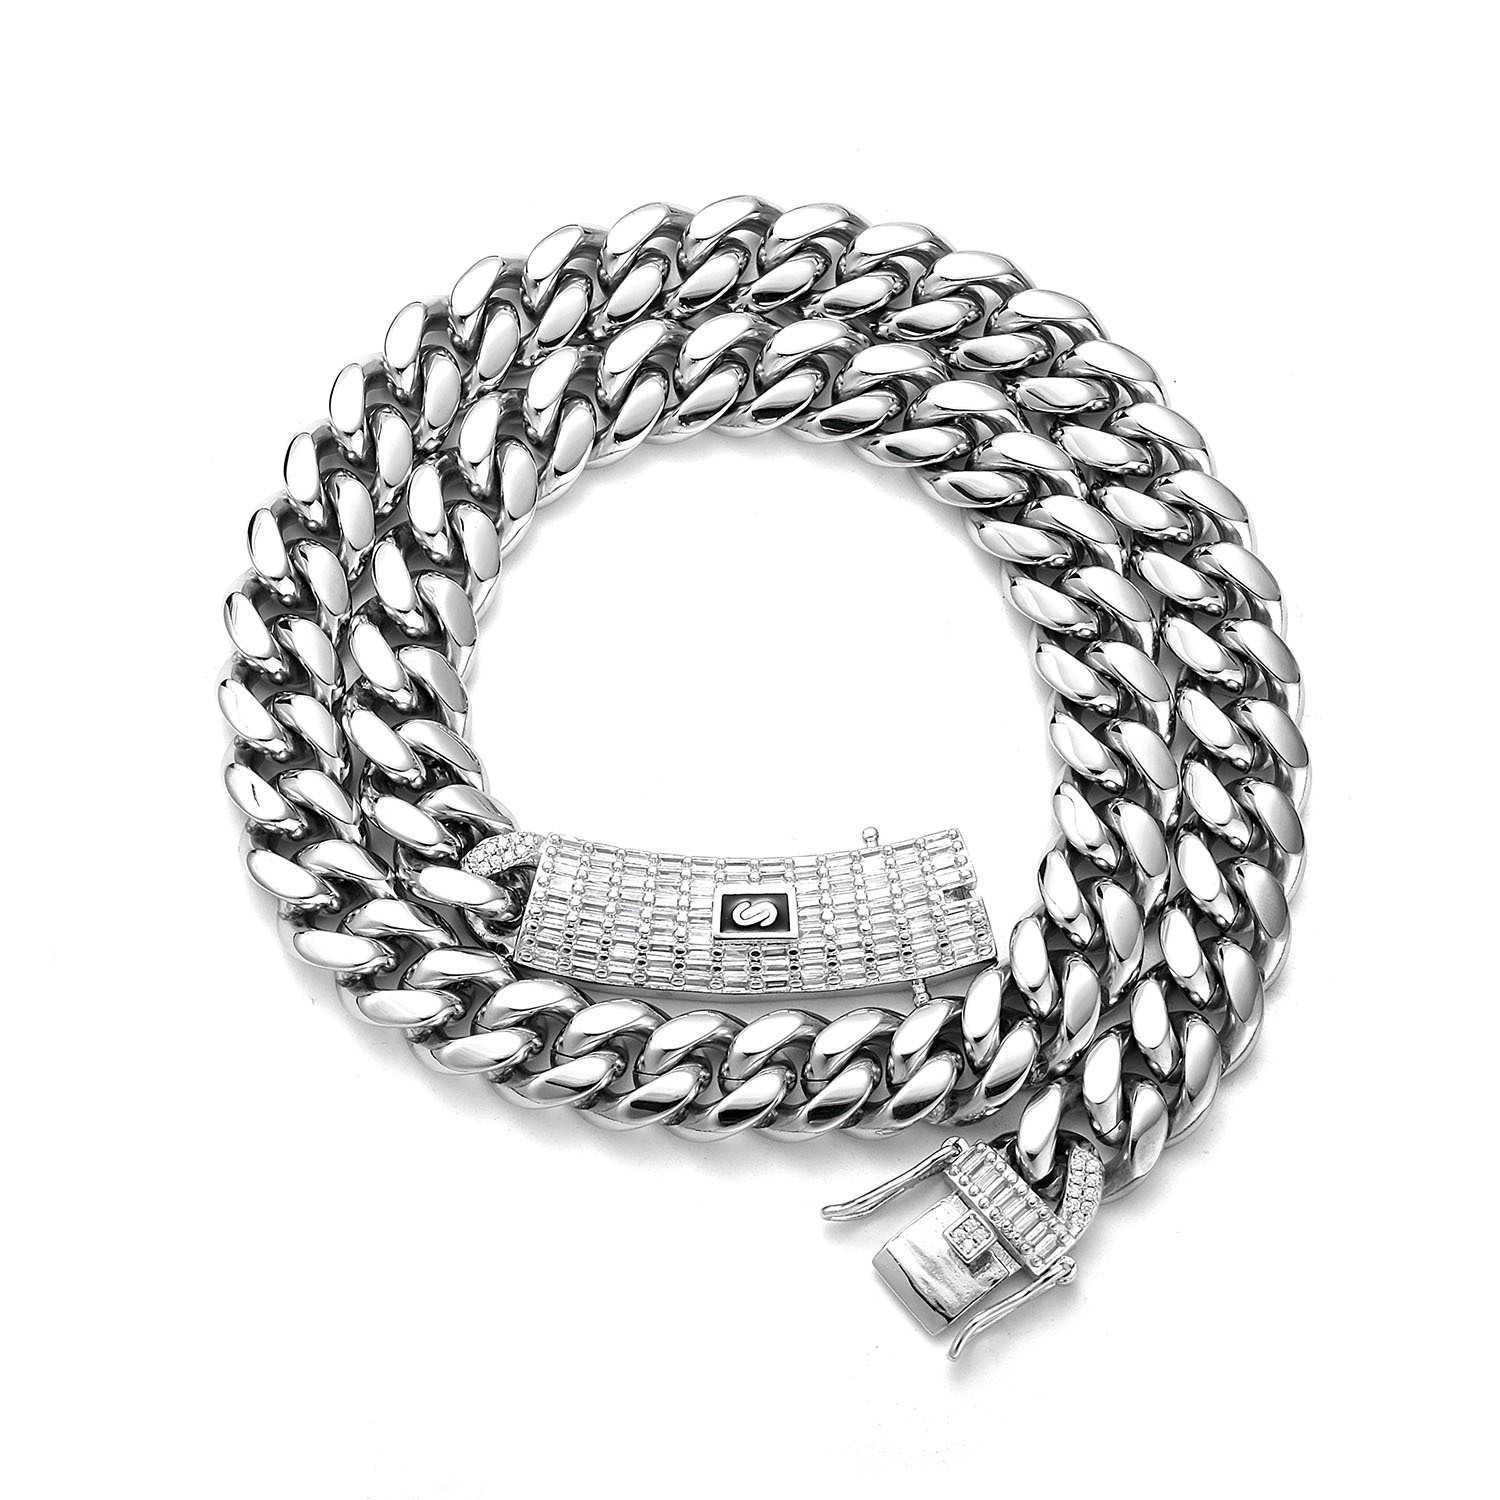 6mm Silver-hiphop-16inch